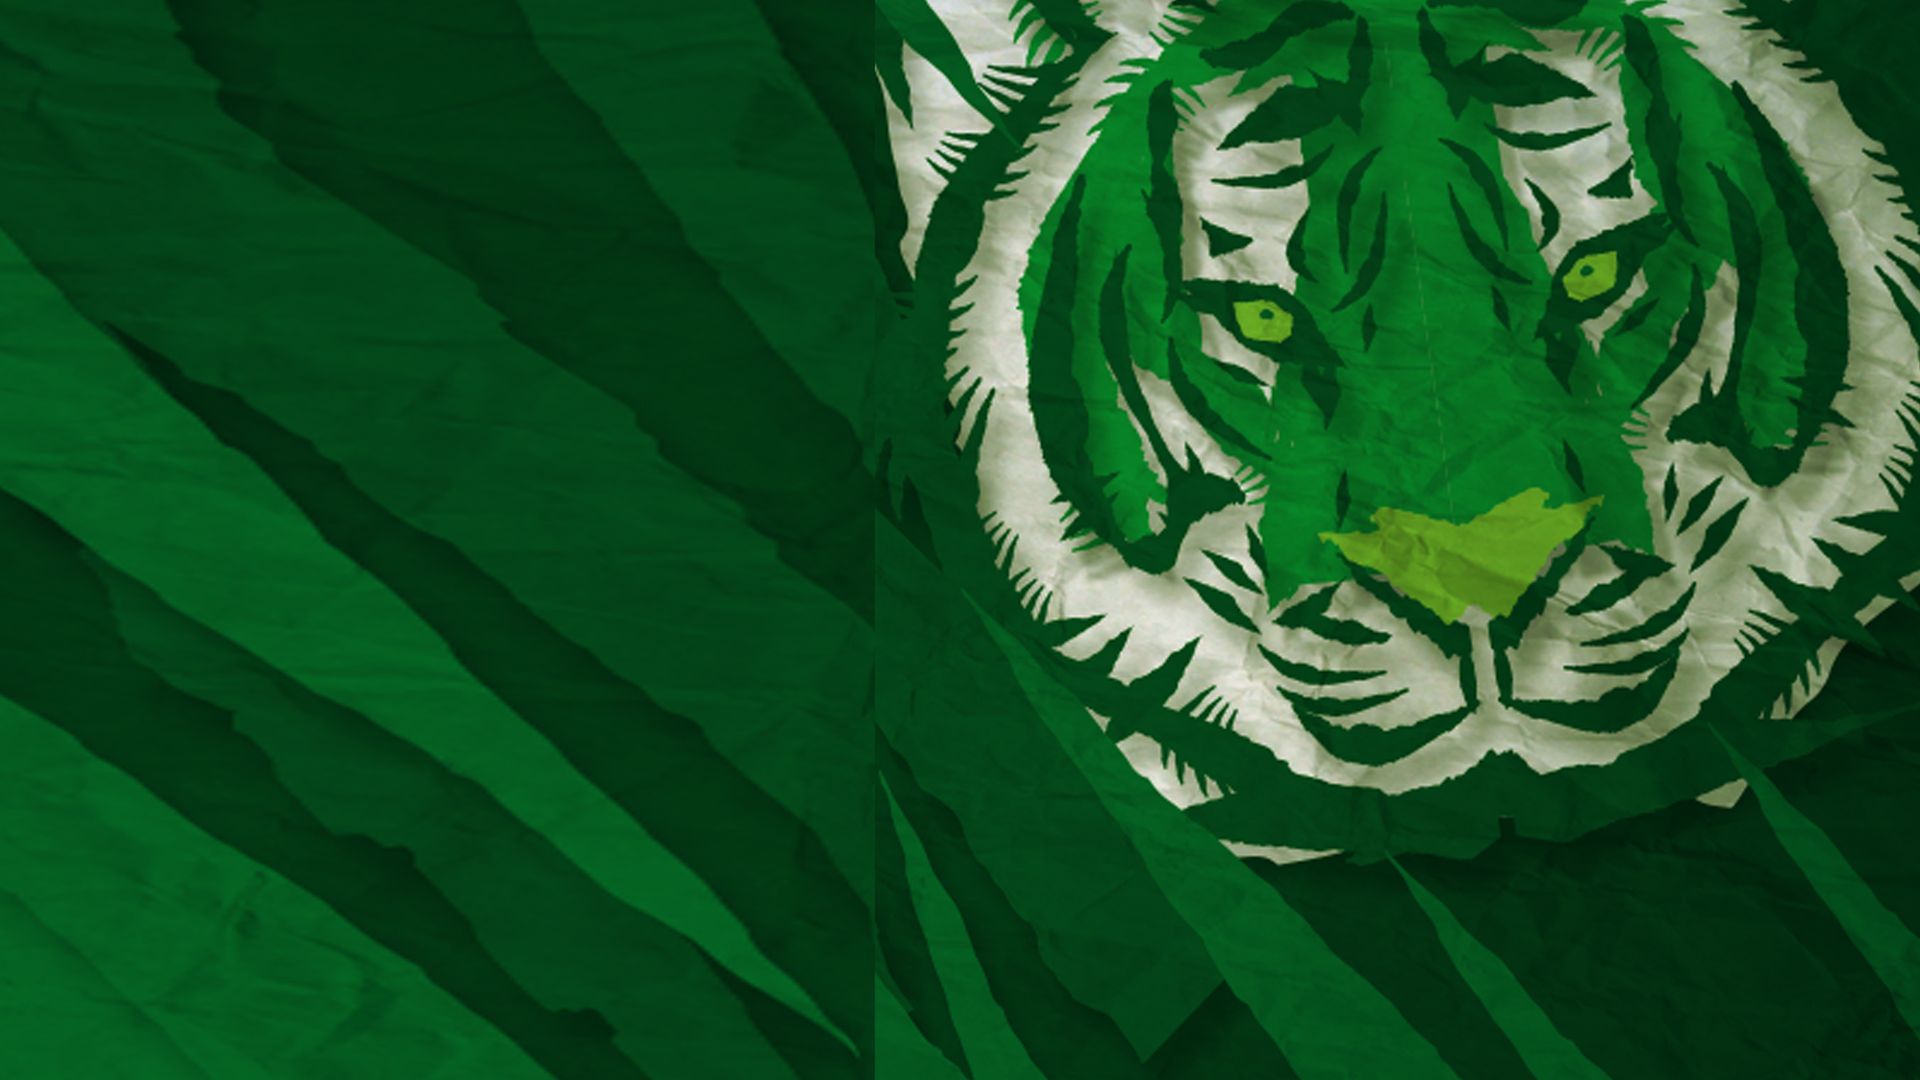 Waking the Green Tiger: A Green Movement Rises